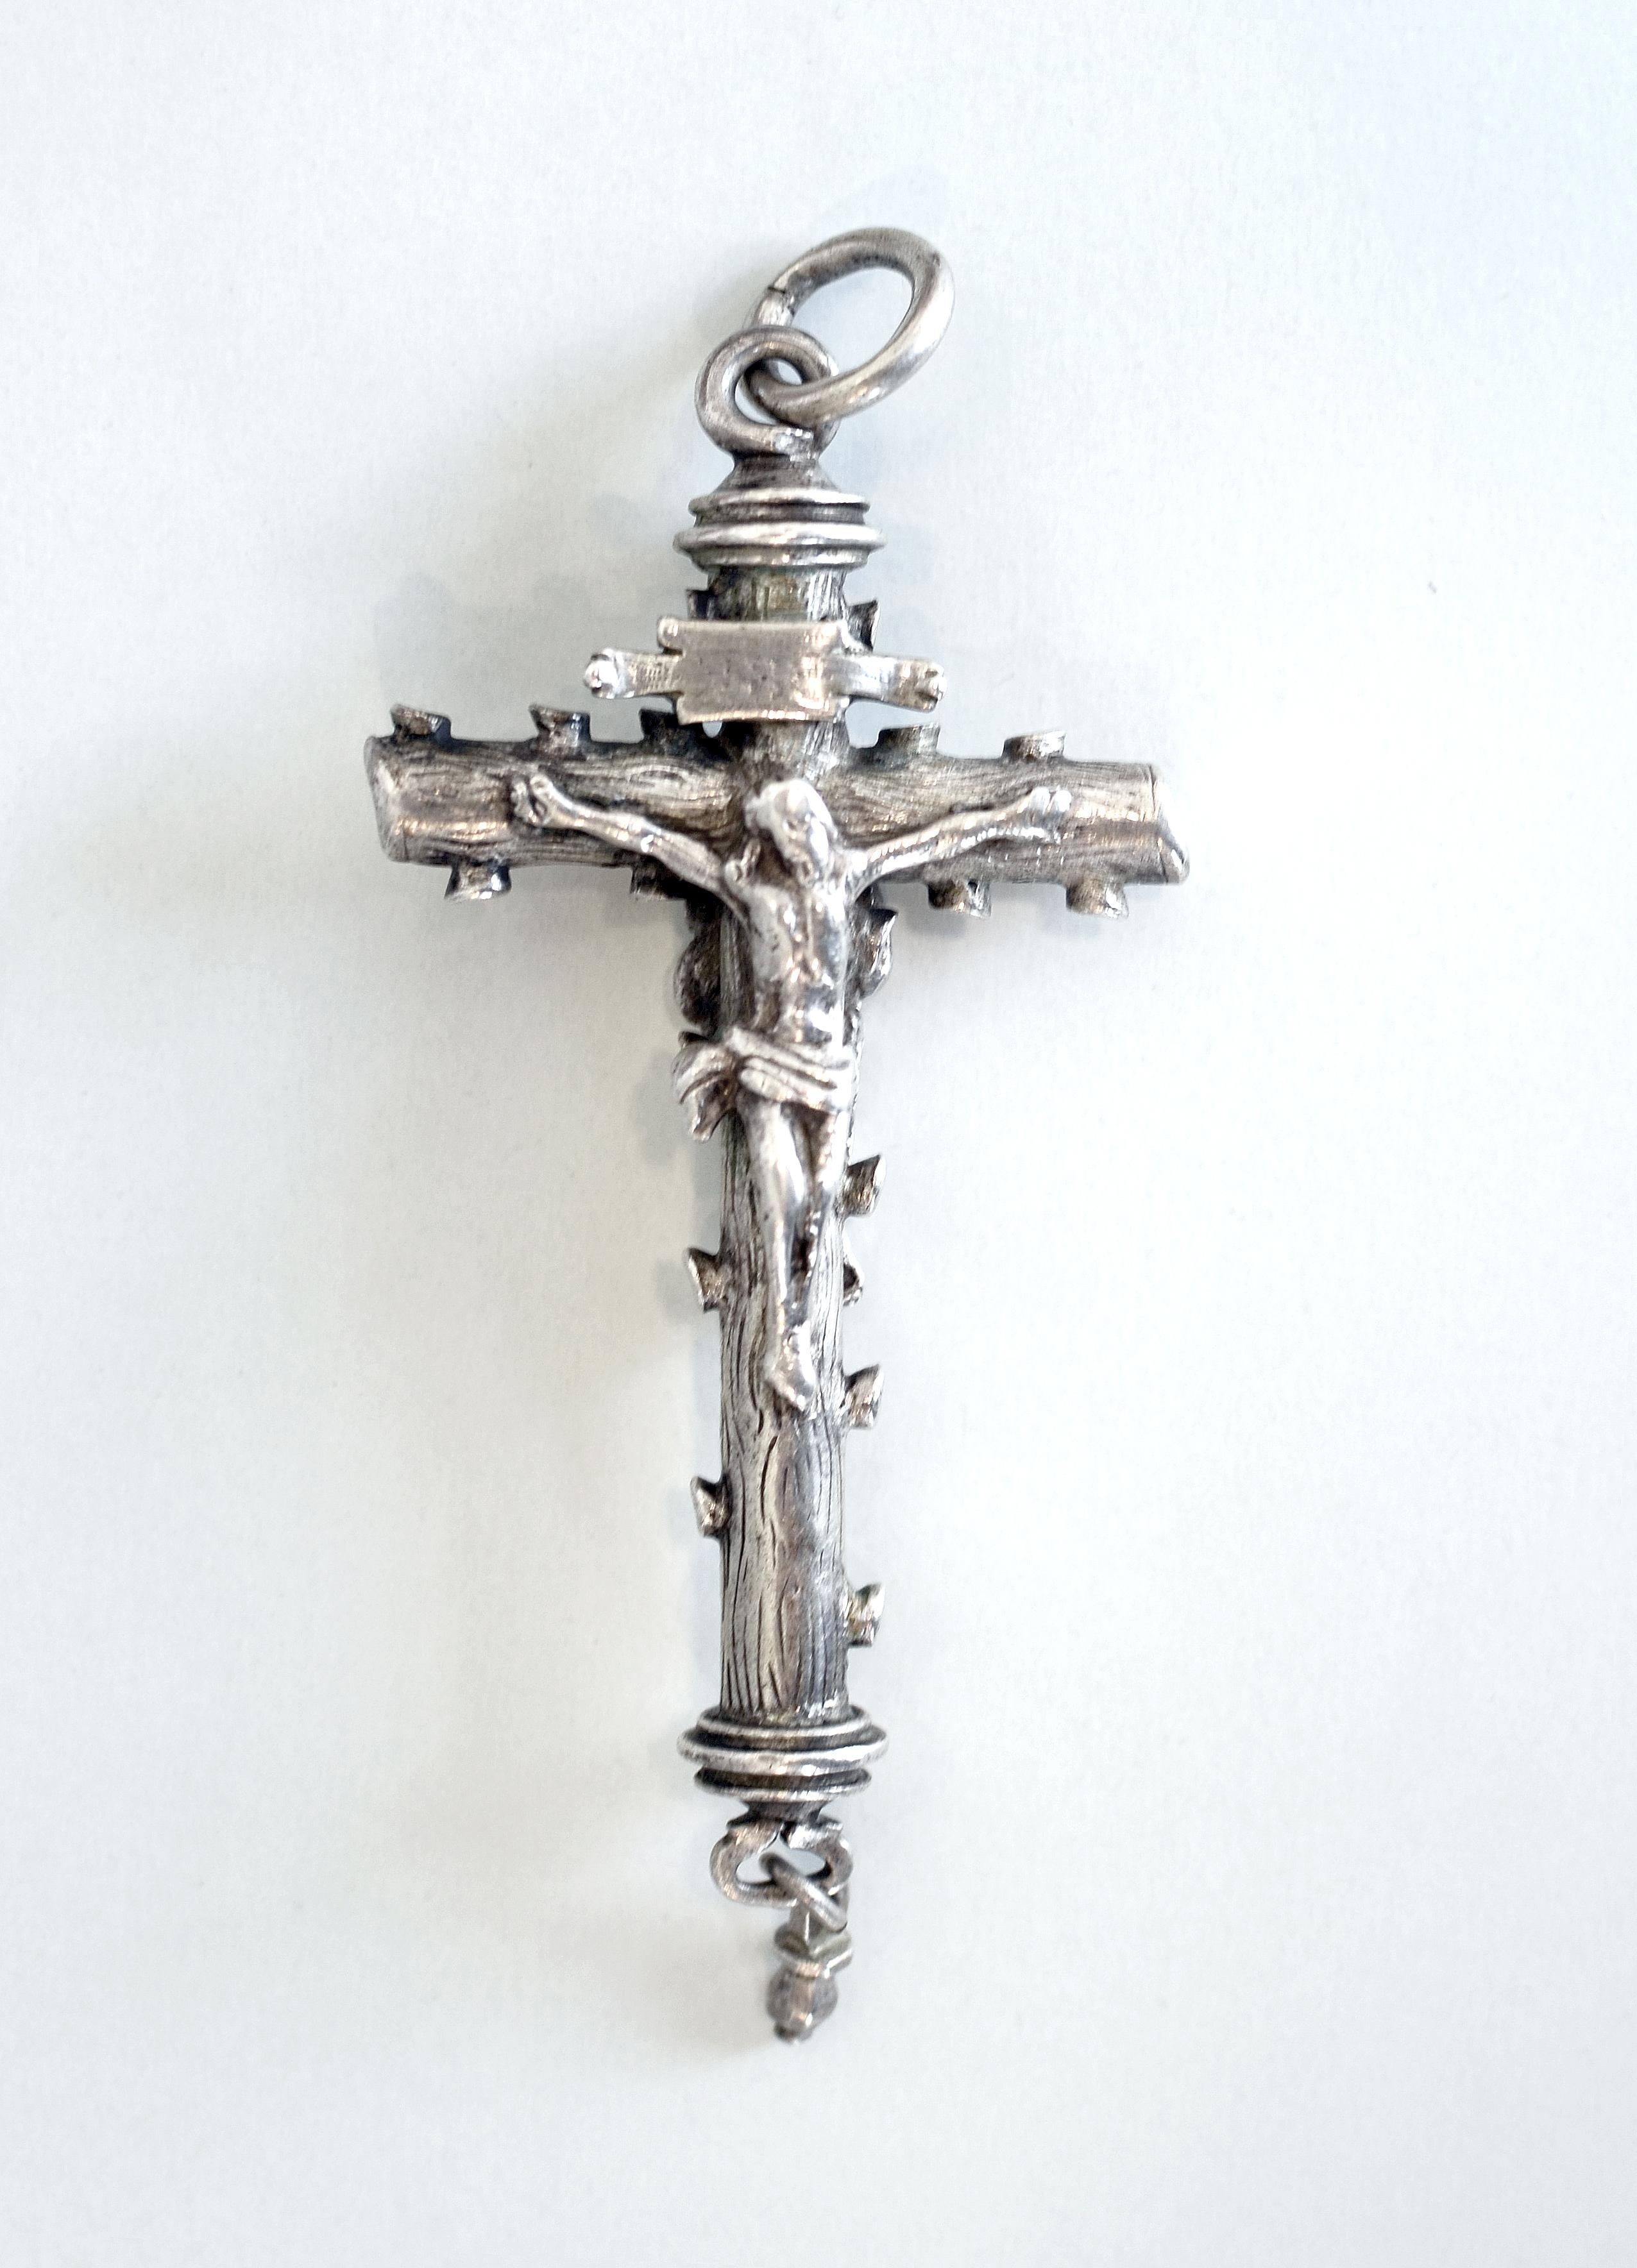 A mid-17th century silver crucifix devotional pendant

Anonymous
Mid-17th century; probably Spain
Silver

Approximate size: 11 x 4.8 cm
Weight: 40.2 grams

The present crucifix is of the 17th century, probably Spanish in origin, and was likely once